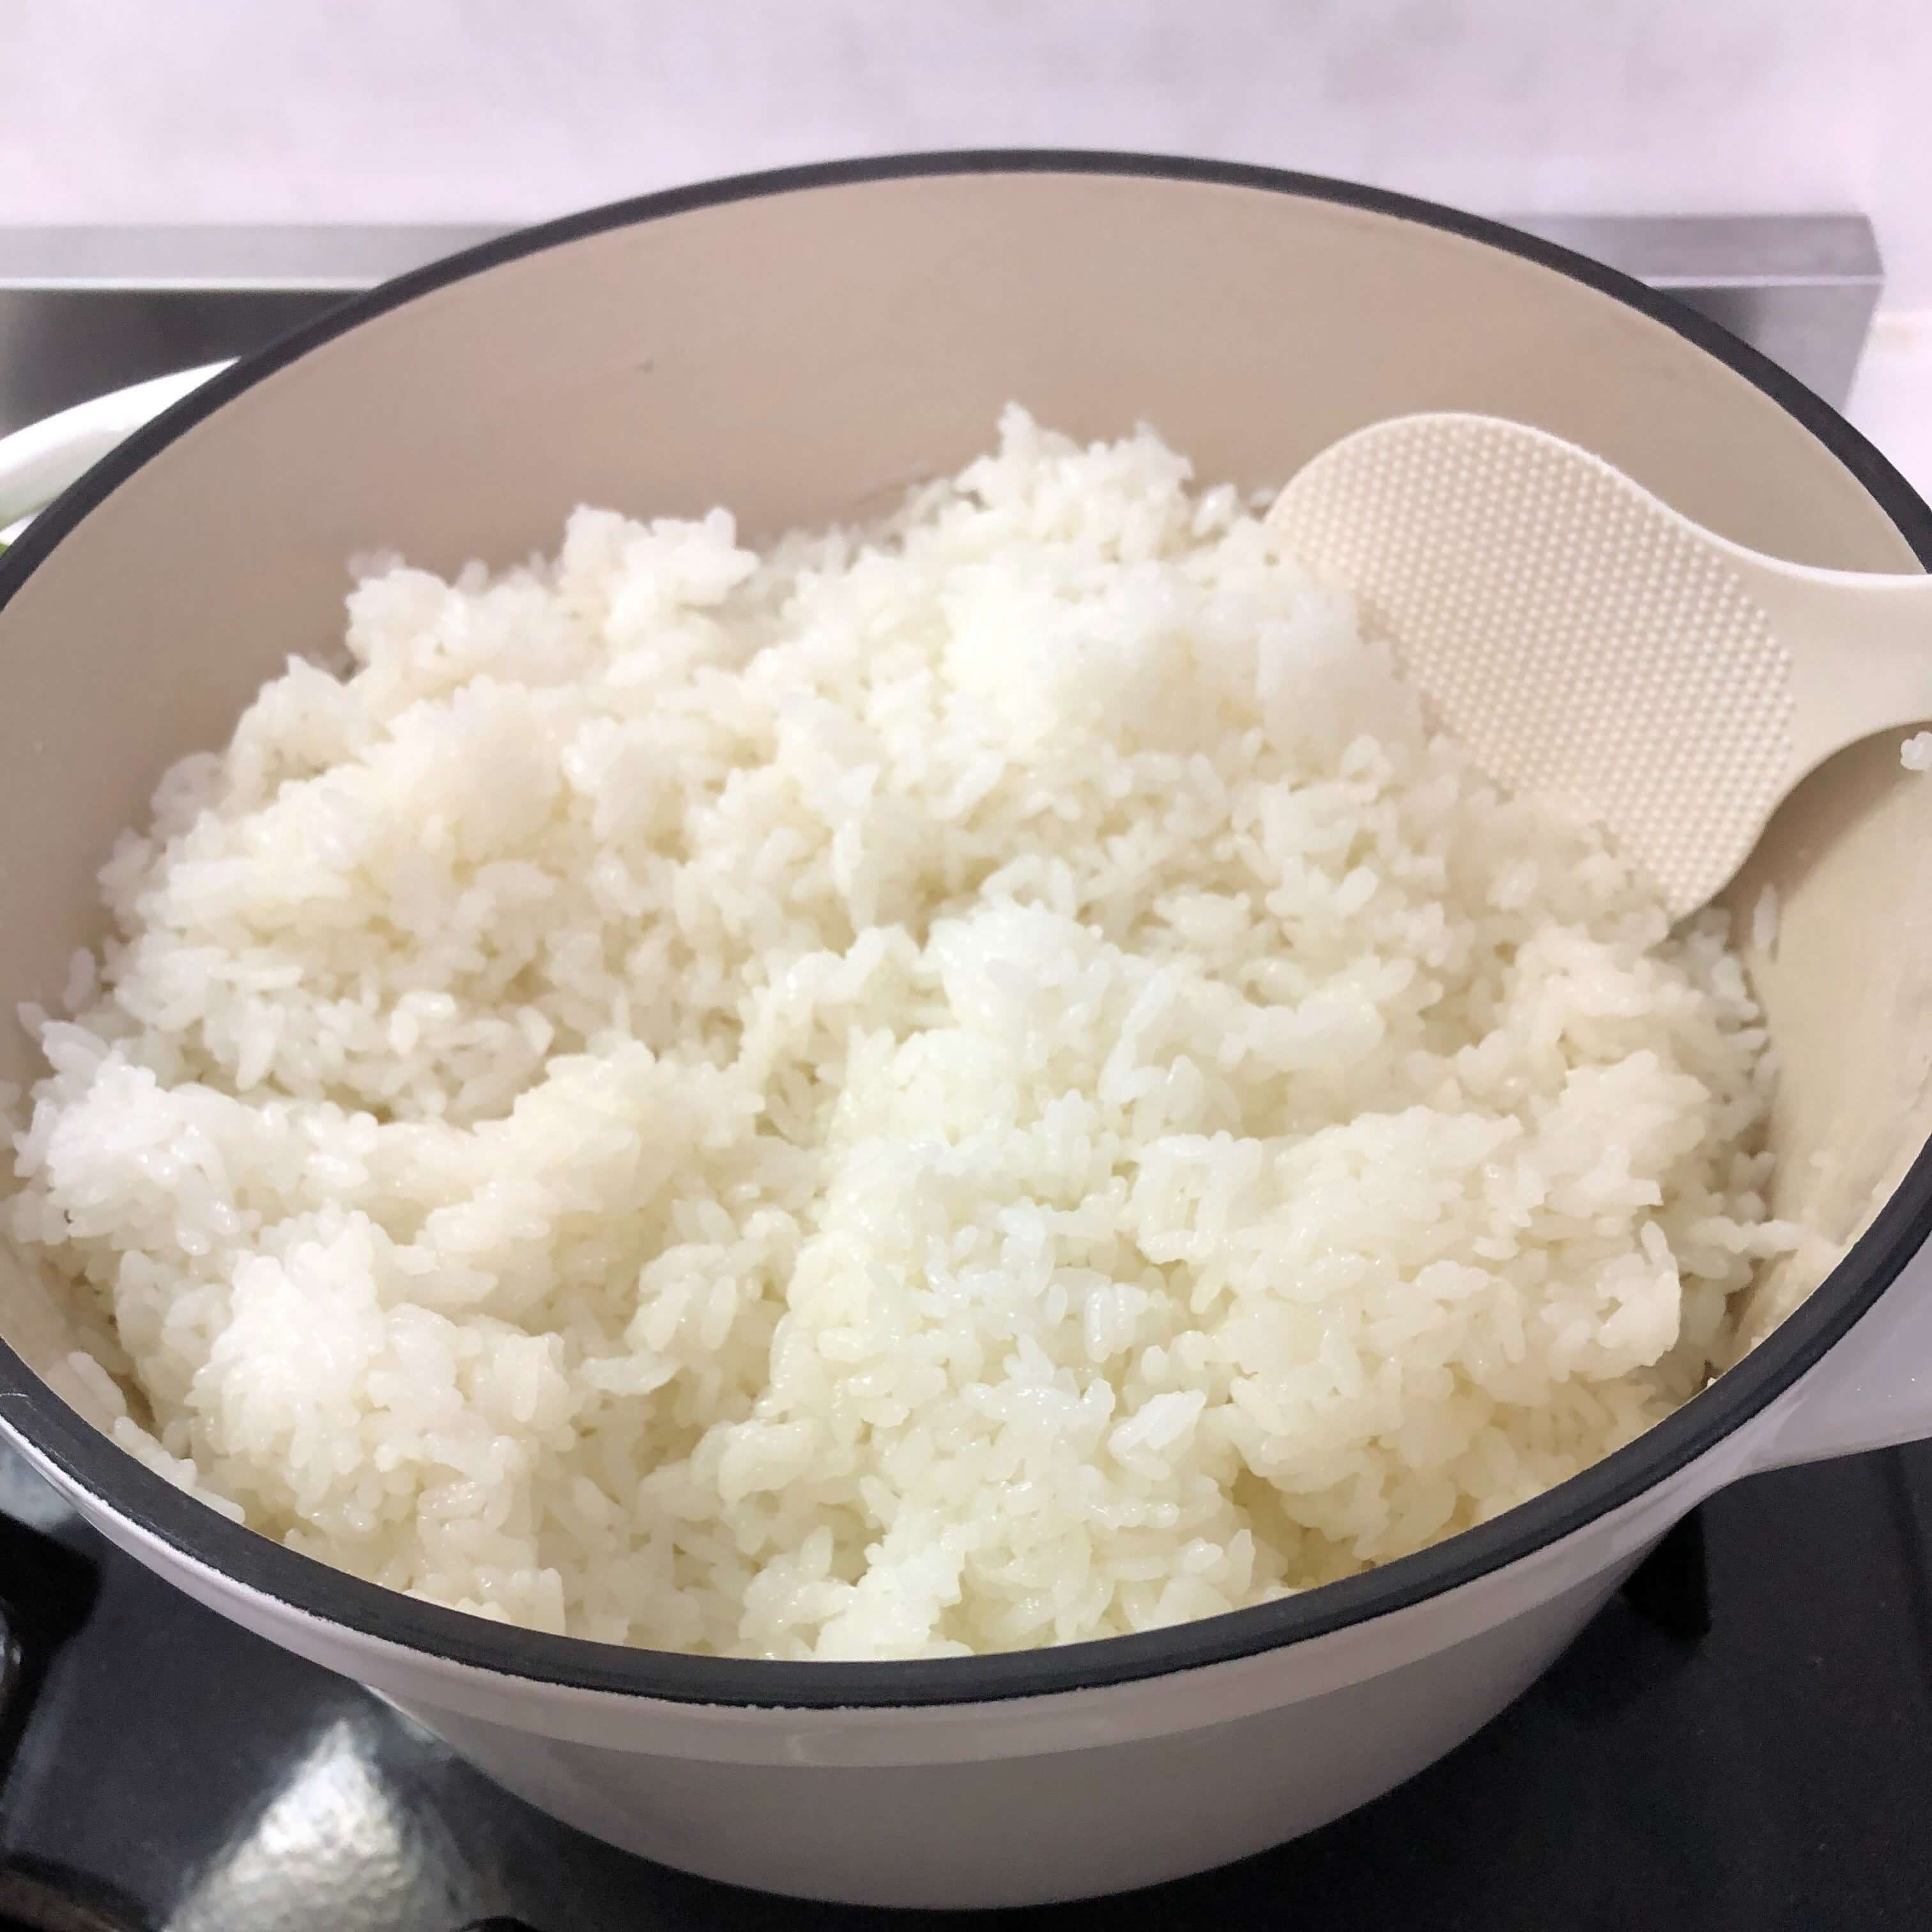 Step 8: How to make Japanese rice in 8 steps